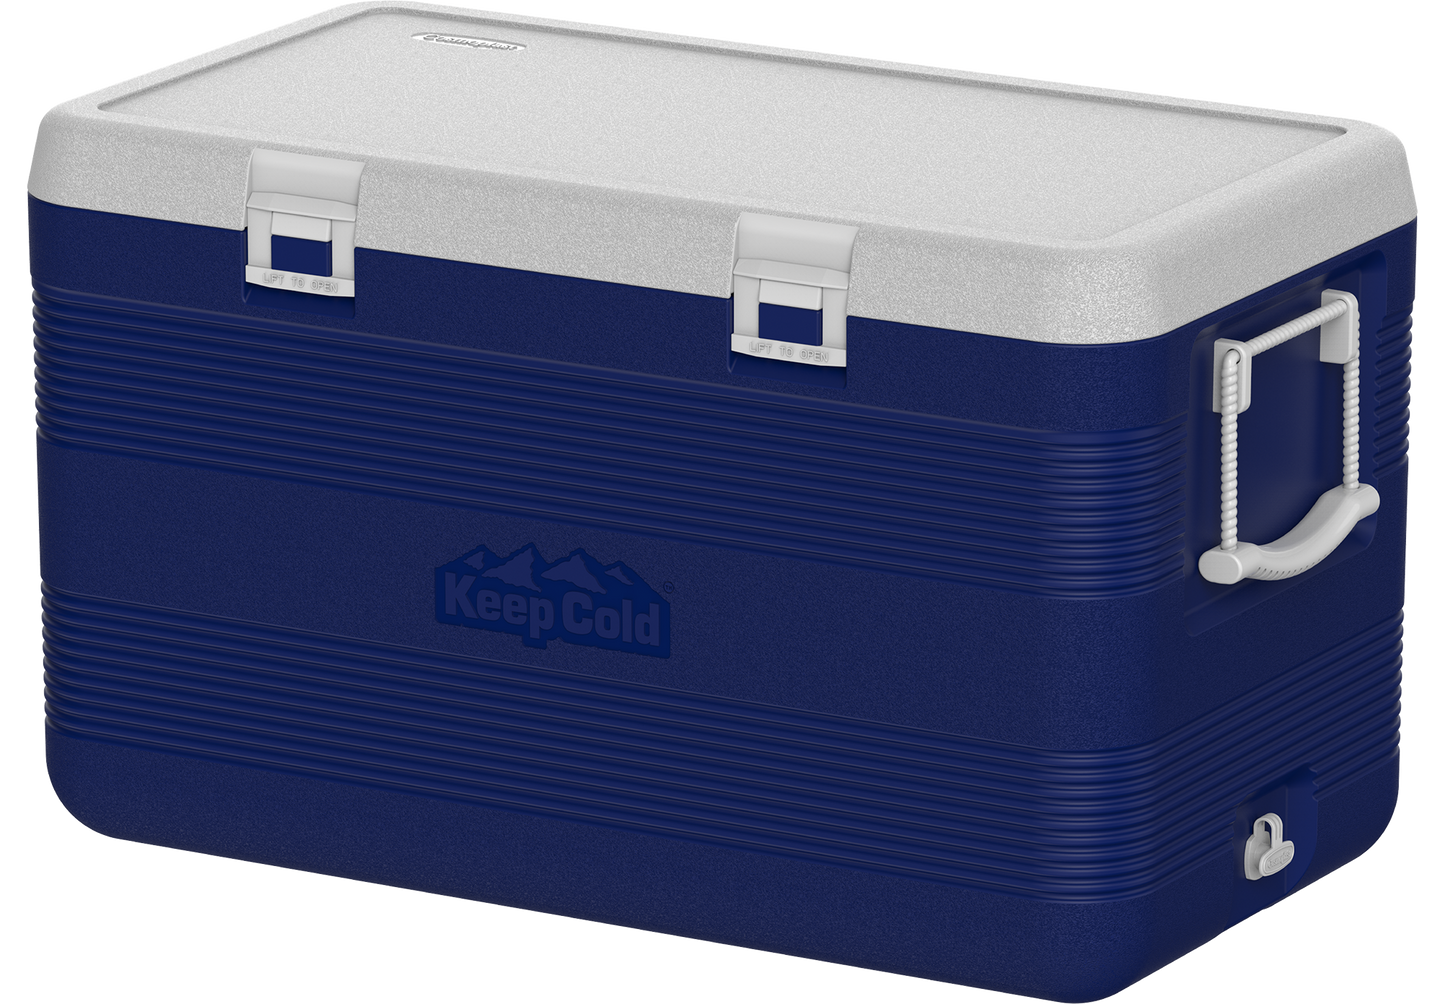 127L KeepCold Deluxe Icebox - Cosmoplast Bahrain